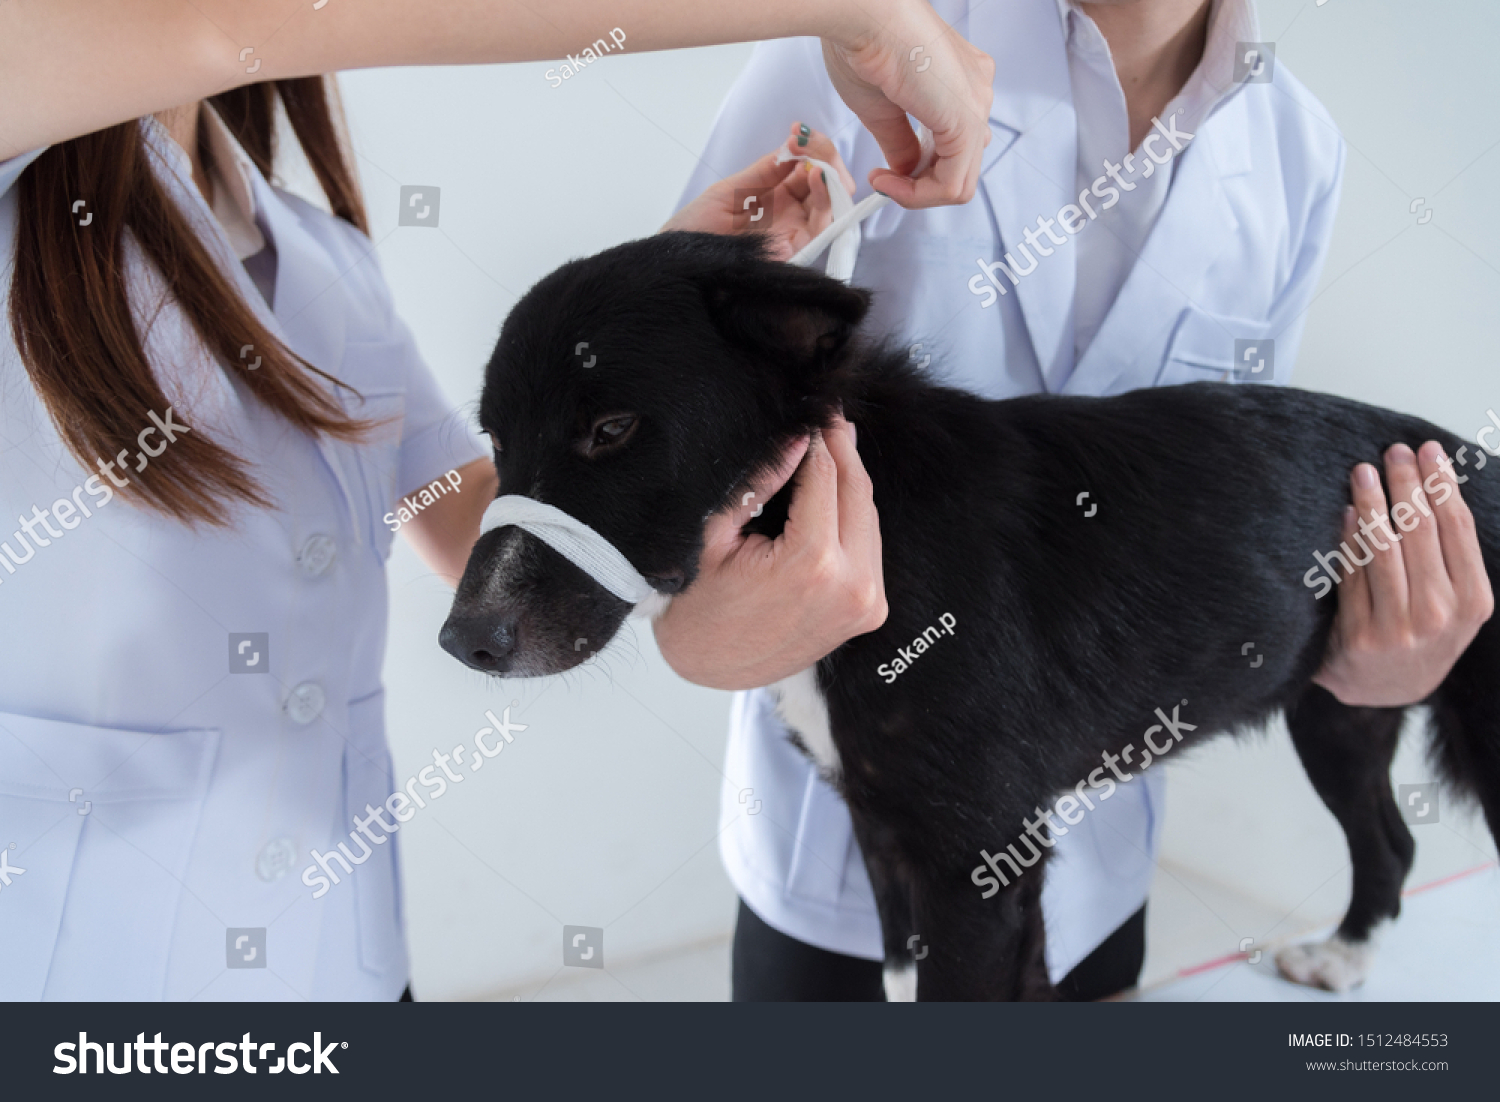 veterinary have control and tie mouth a dog to immunize for control and prevention of rabies disease ,animal restraint concept
 #1512484553